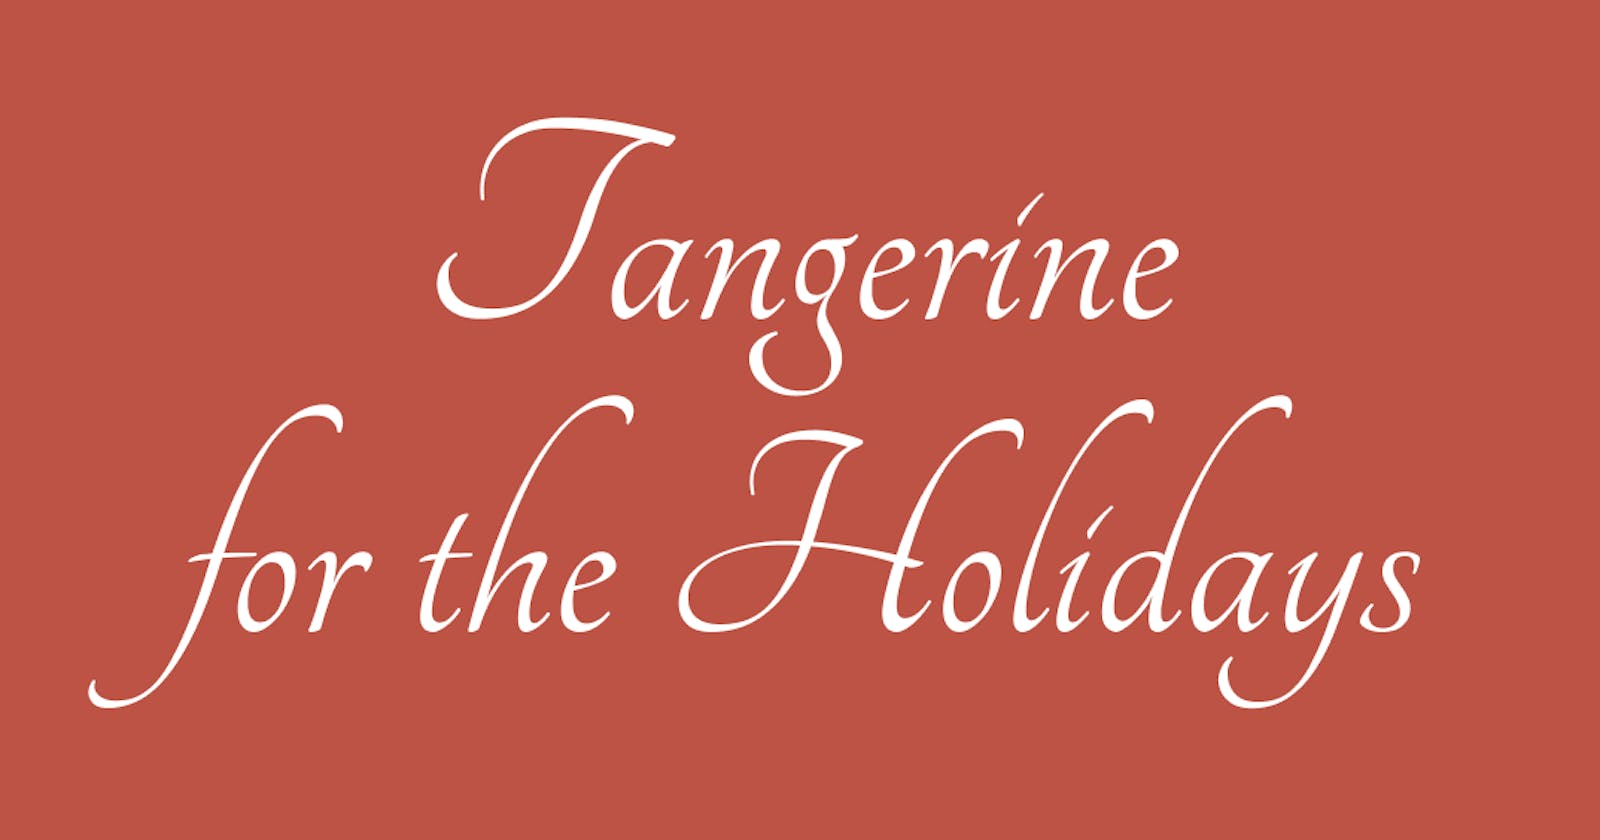 FontDiscovery 🖼️ 50: Tangerine the Perfect Font for Christmas